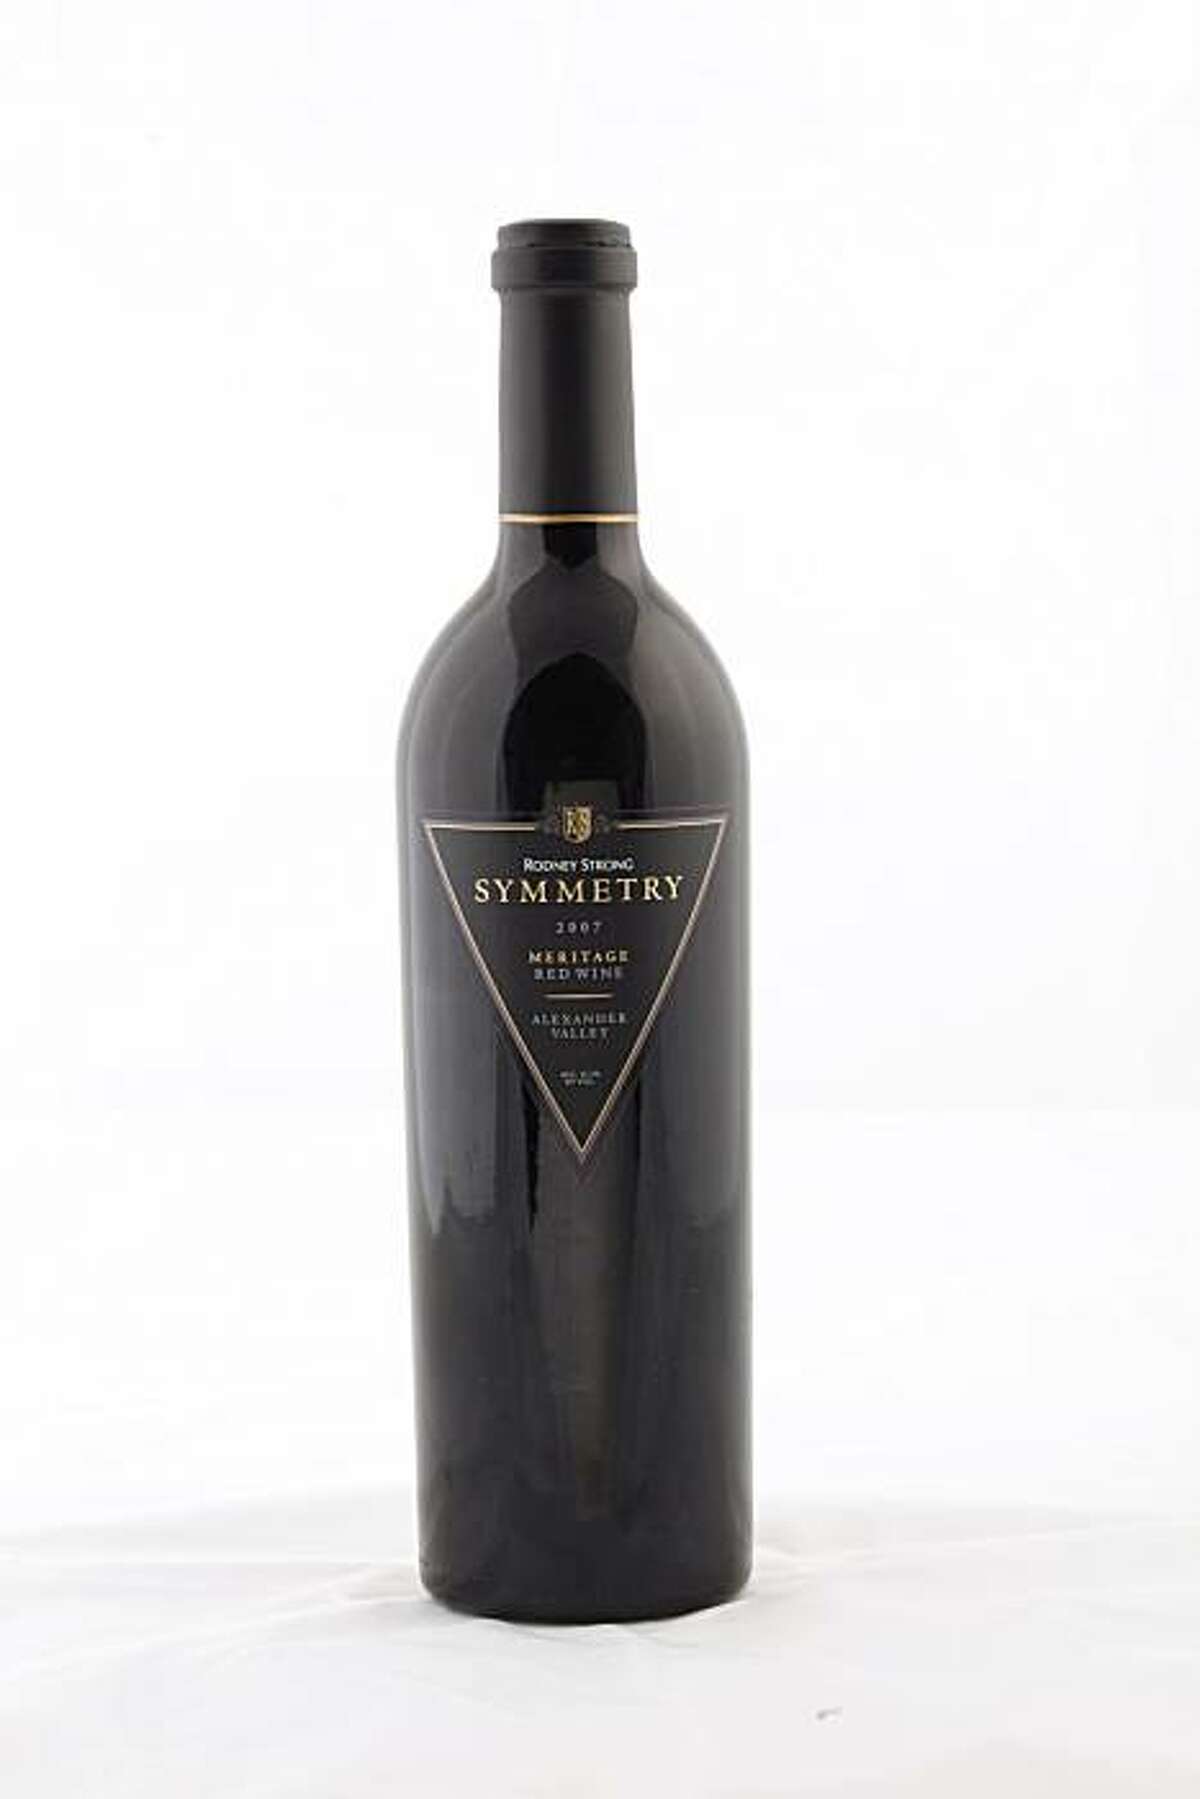 2007 Rodney Strong Symmetry Alexander Valley Meritage Red Wine as seen in San Francisco, Calif., on October 20, 2010.